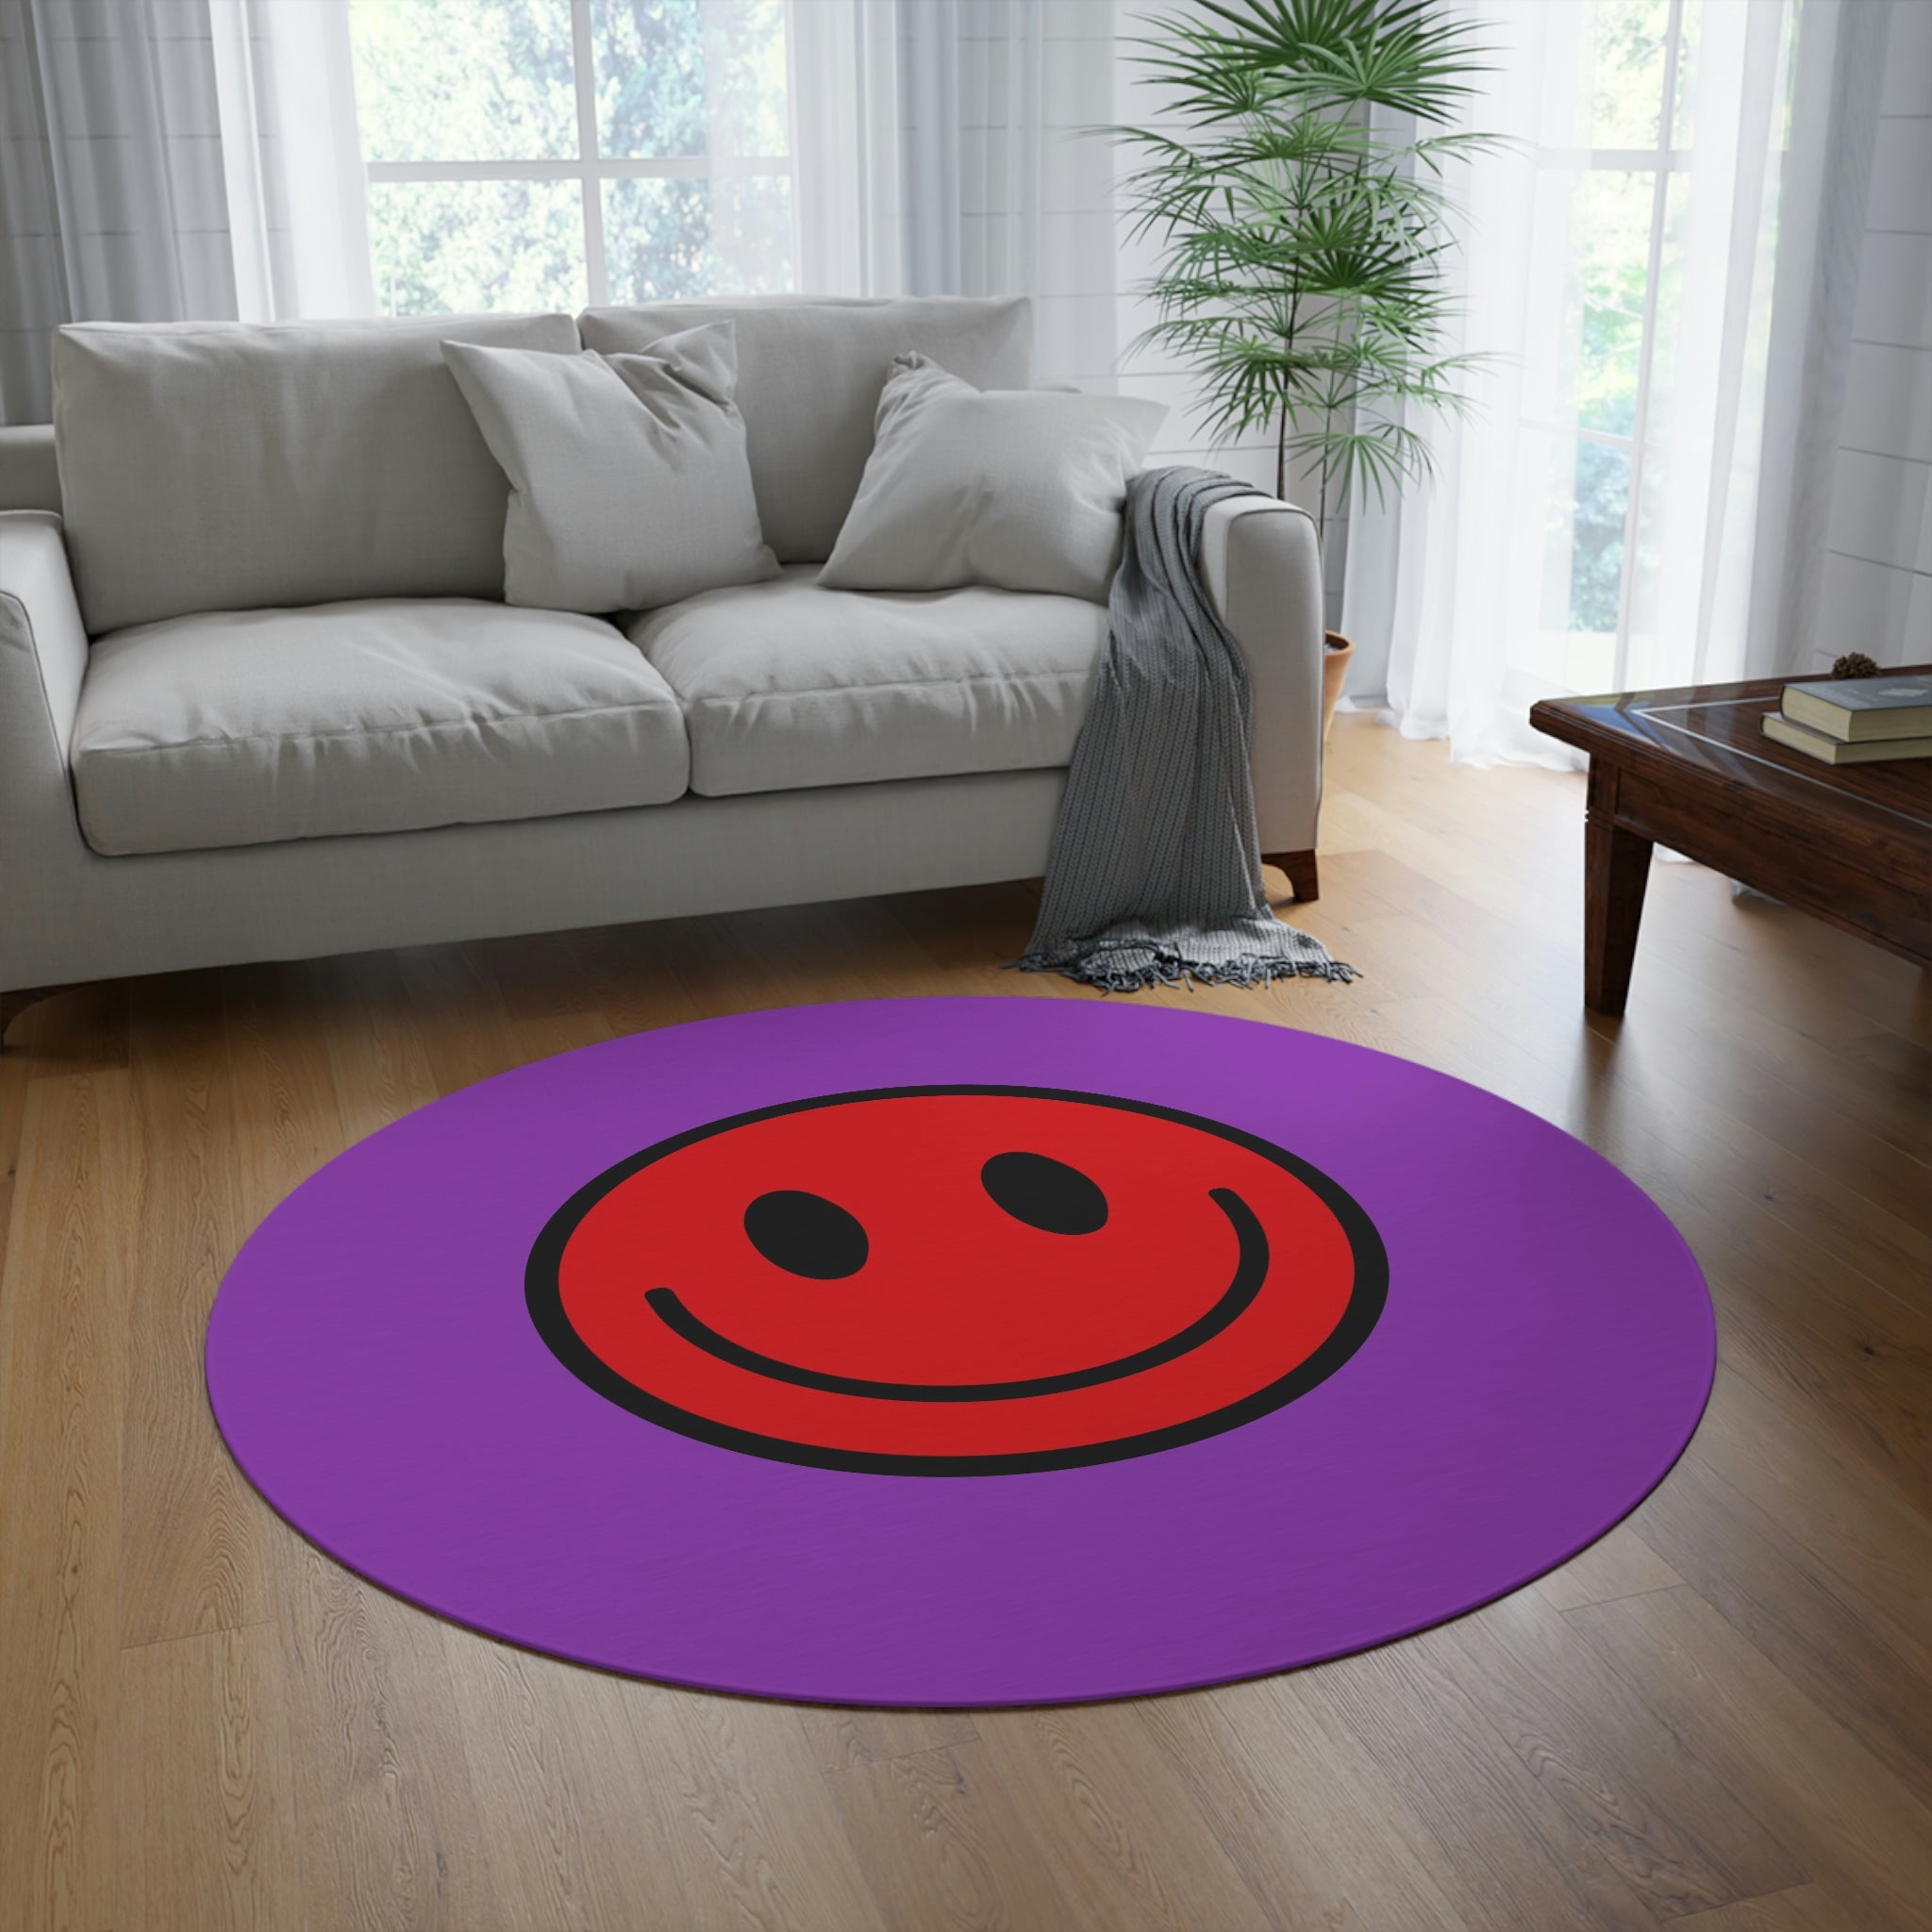 Round Rug Happy Face pattern red/purple